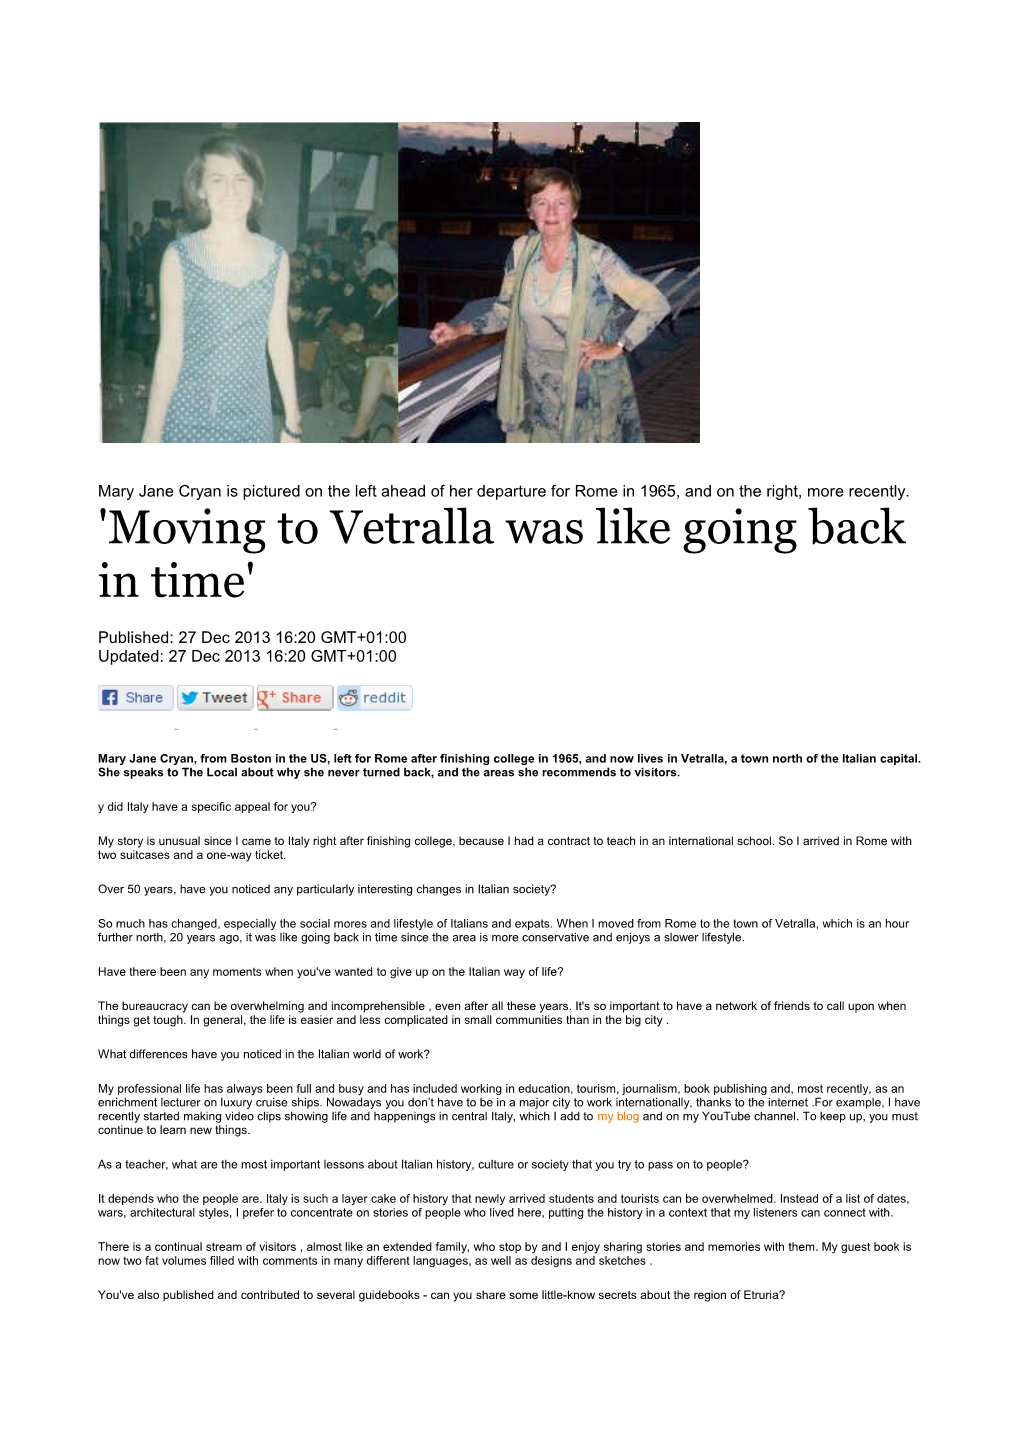 'Moving to Vetralla Was Like Going Back in Time'